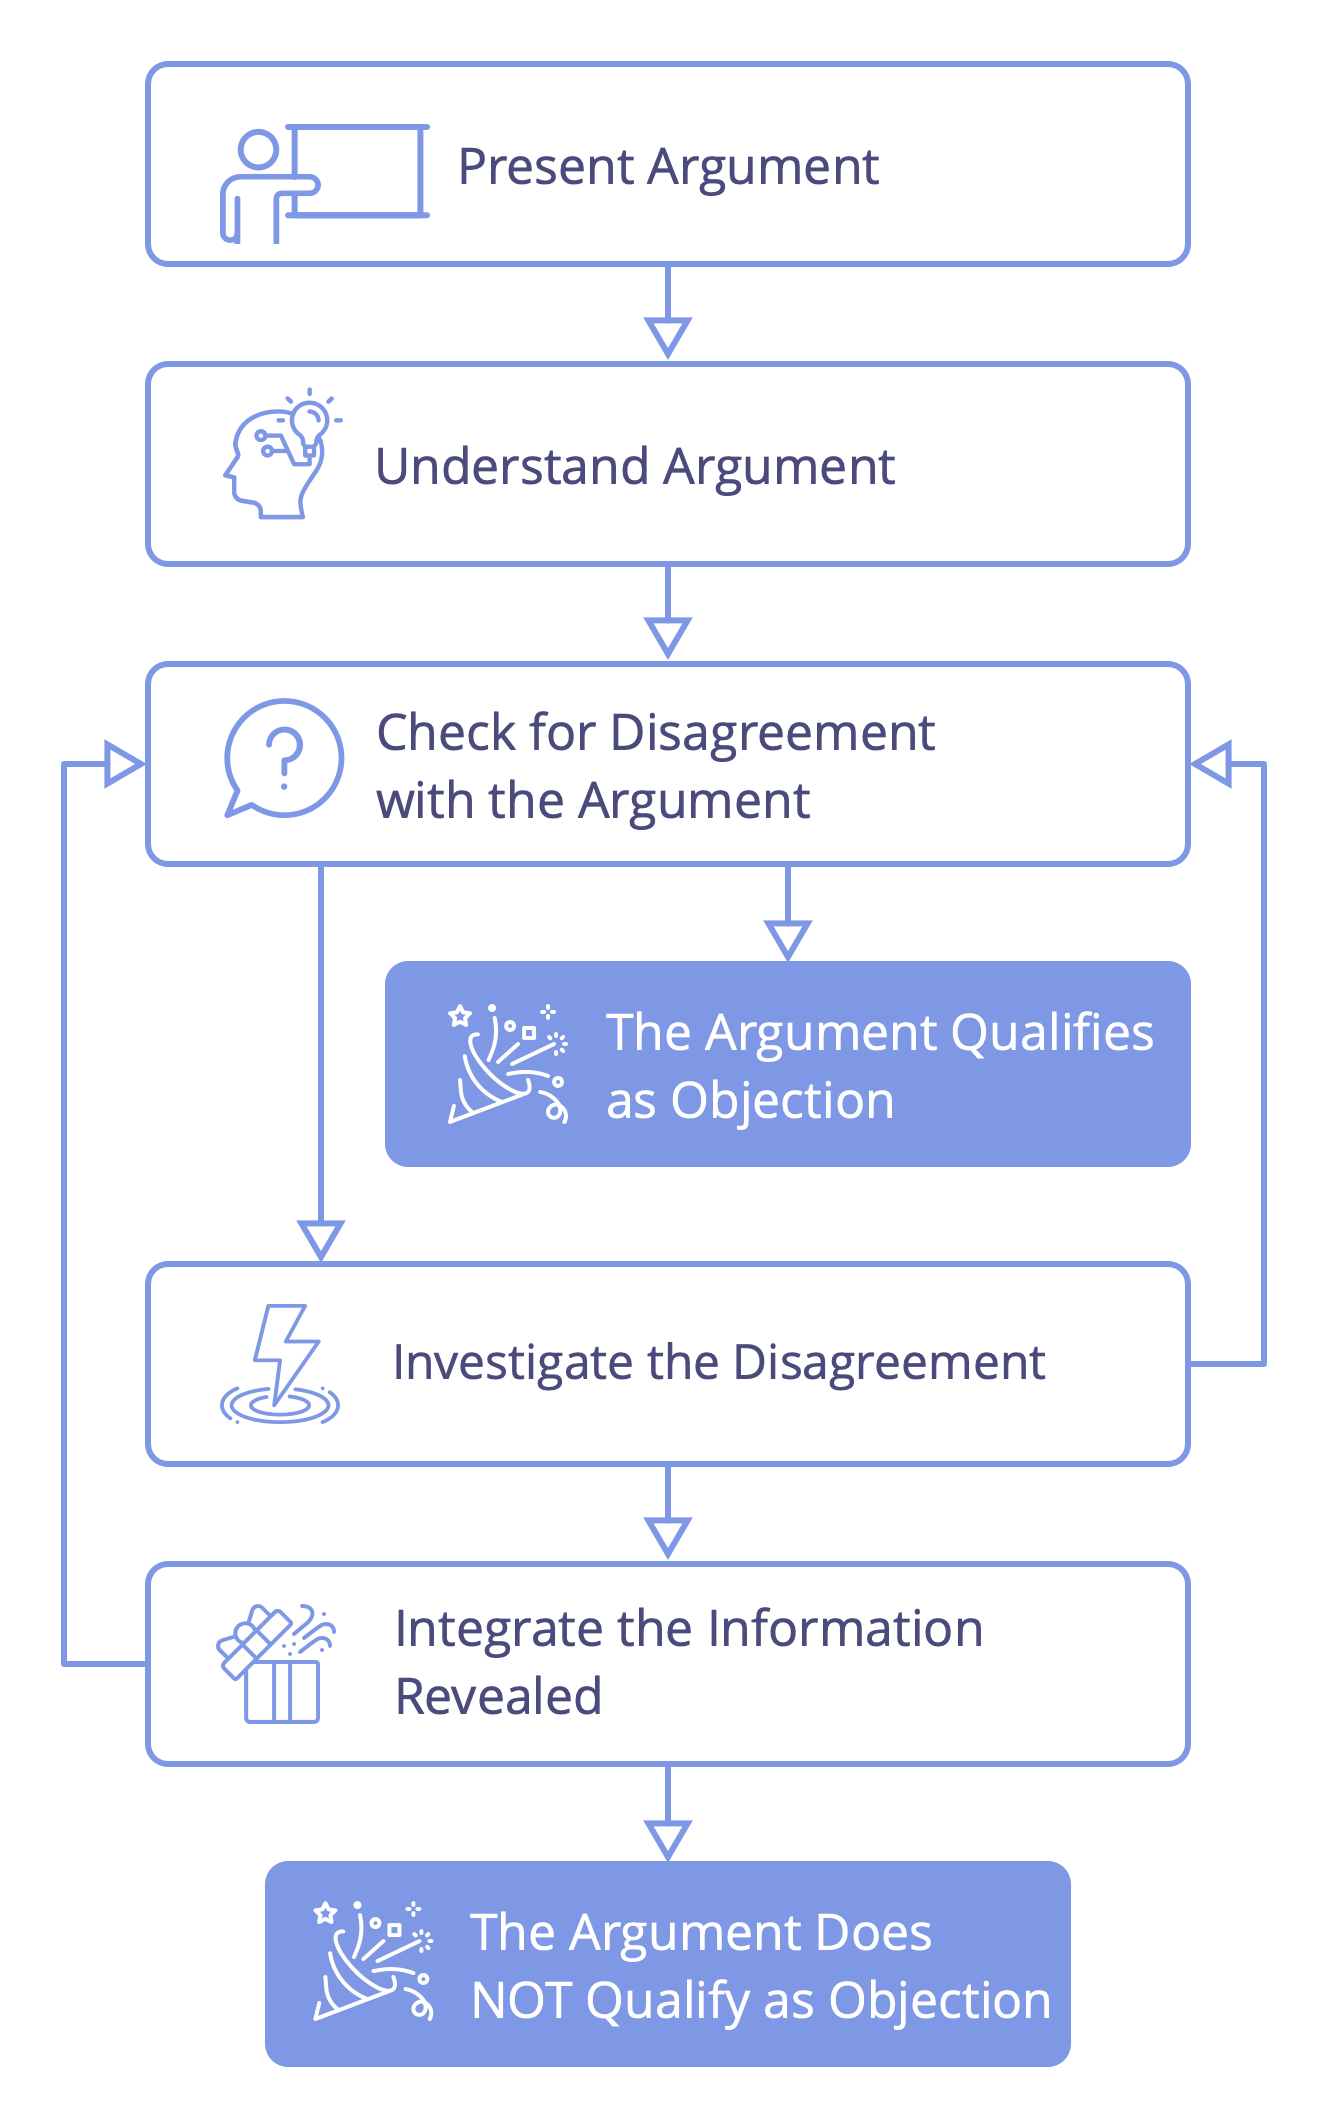 A process for testing if an argument qualifies as an objection